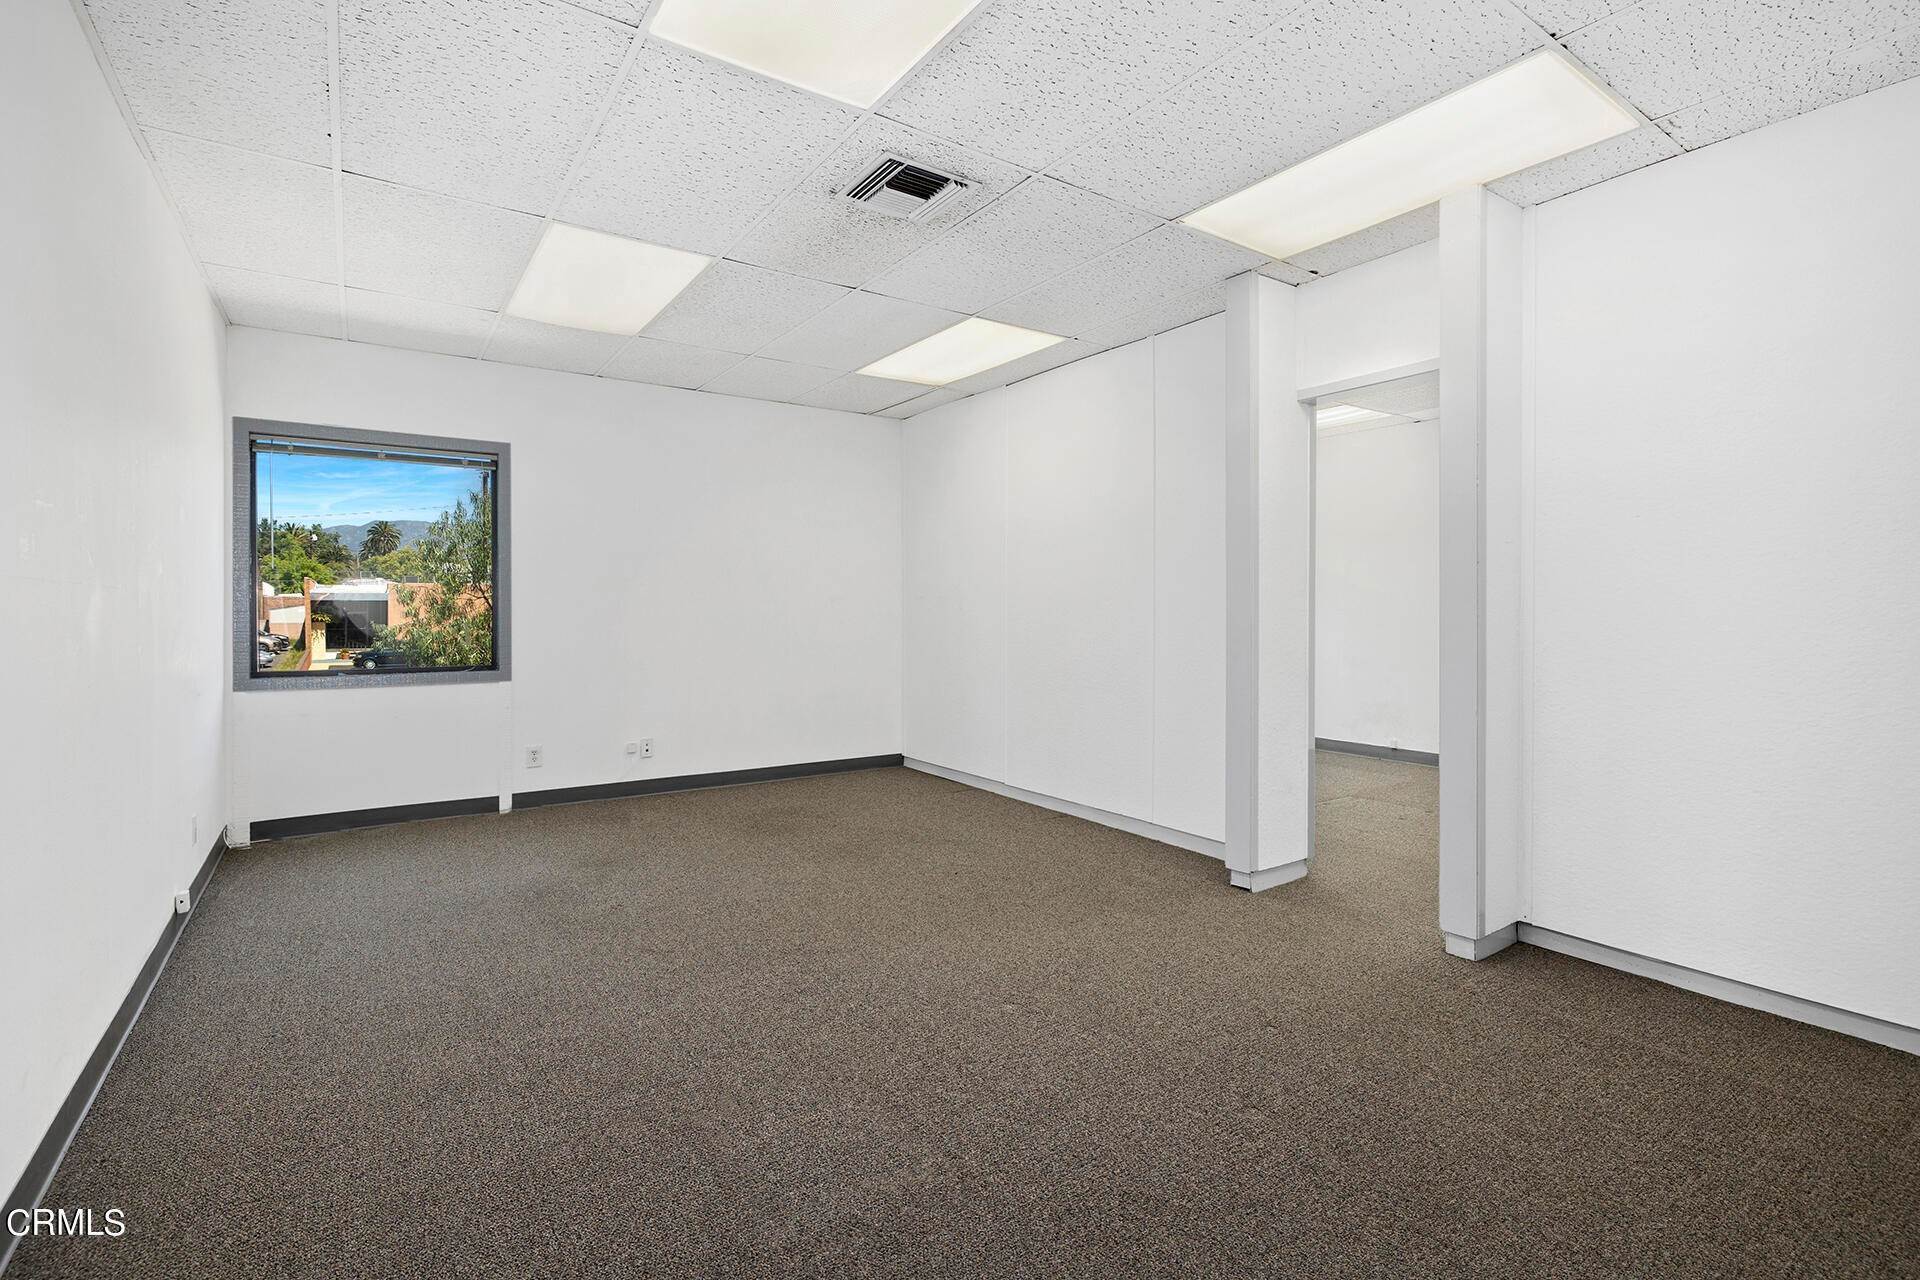 17. Offices for Sale at 1151 El Centro Street South Pasadena, California 91030 United States